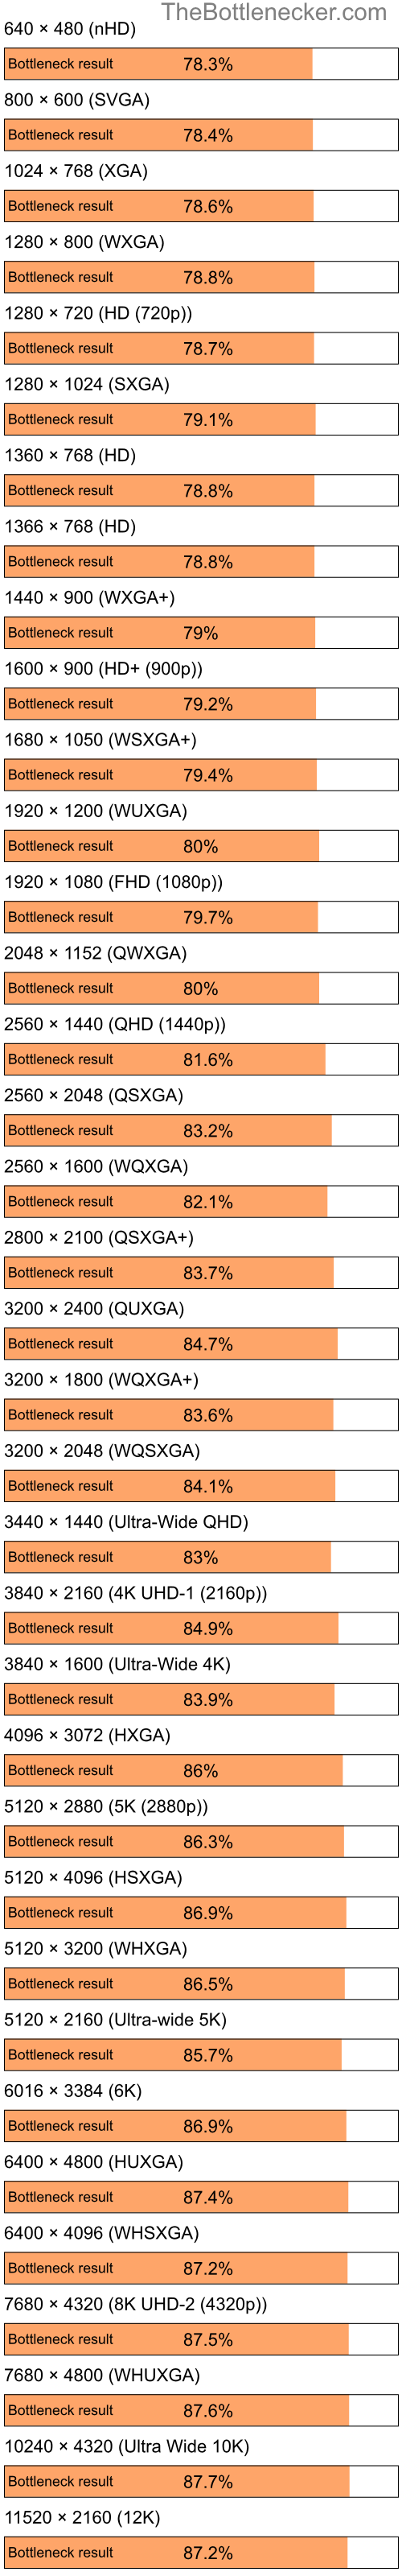 Bottleneck results by resolution for Intel Atom N280 and NVIDIA nForce 630i in7 Days to Die